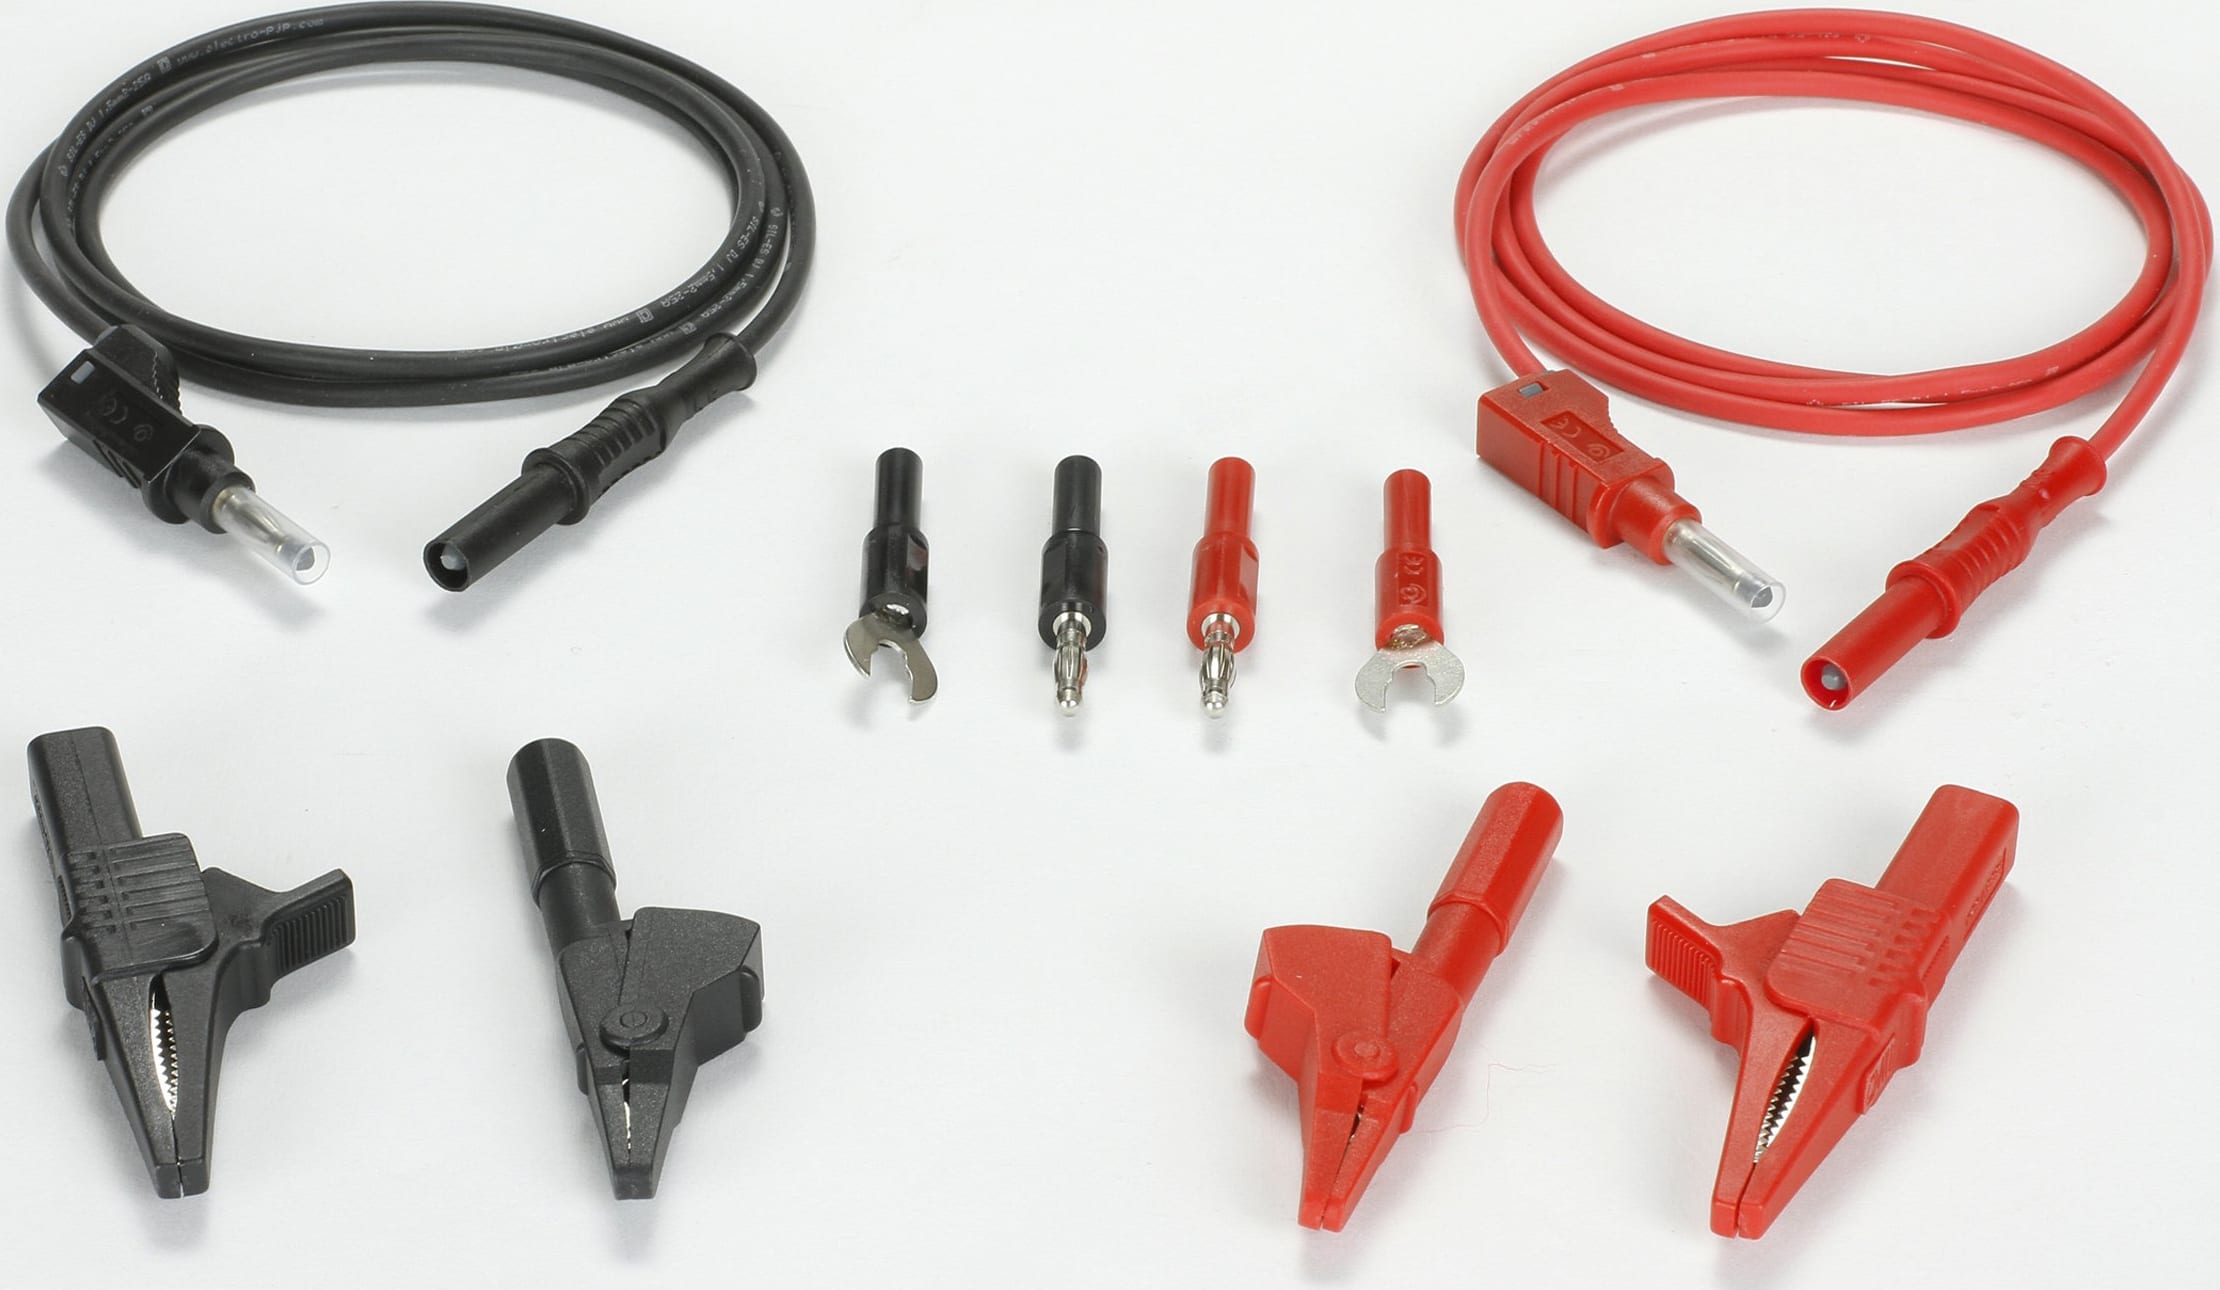 CT4041 Power Supply Accessory Kit